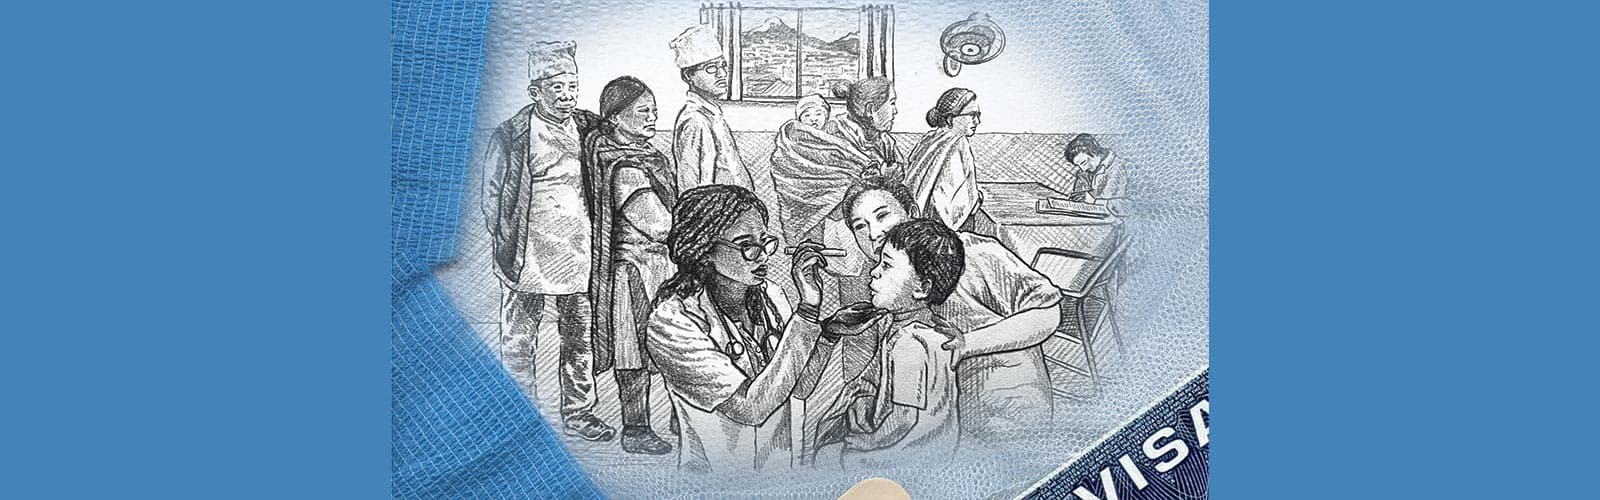 A line drawing of a busy doctor's office with people from various backgrounds depicted.